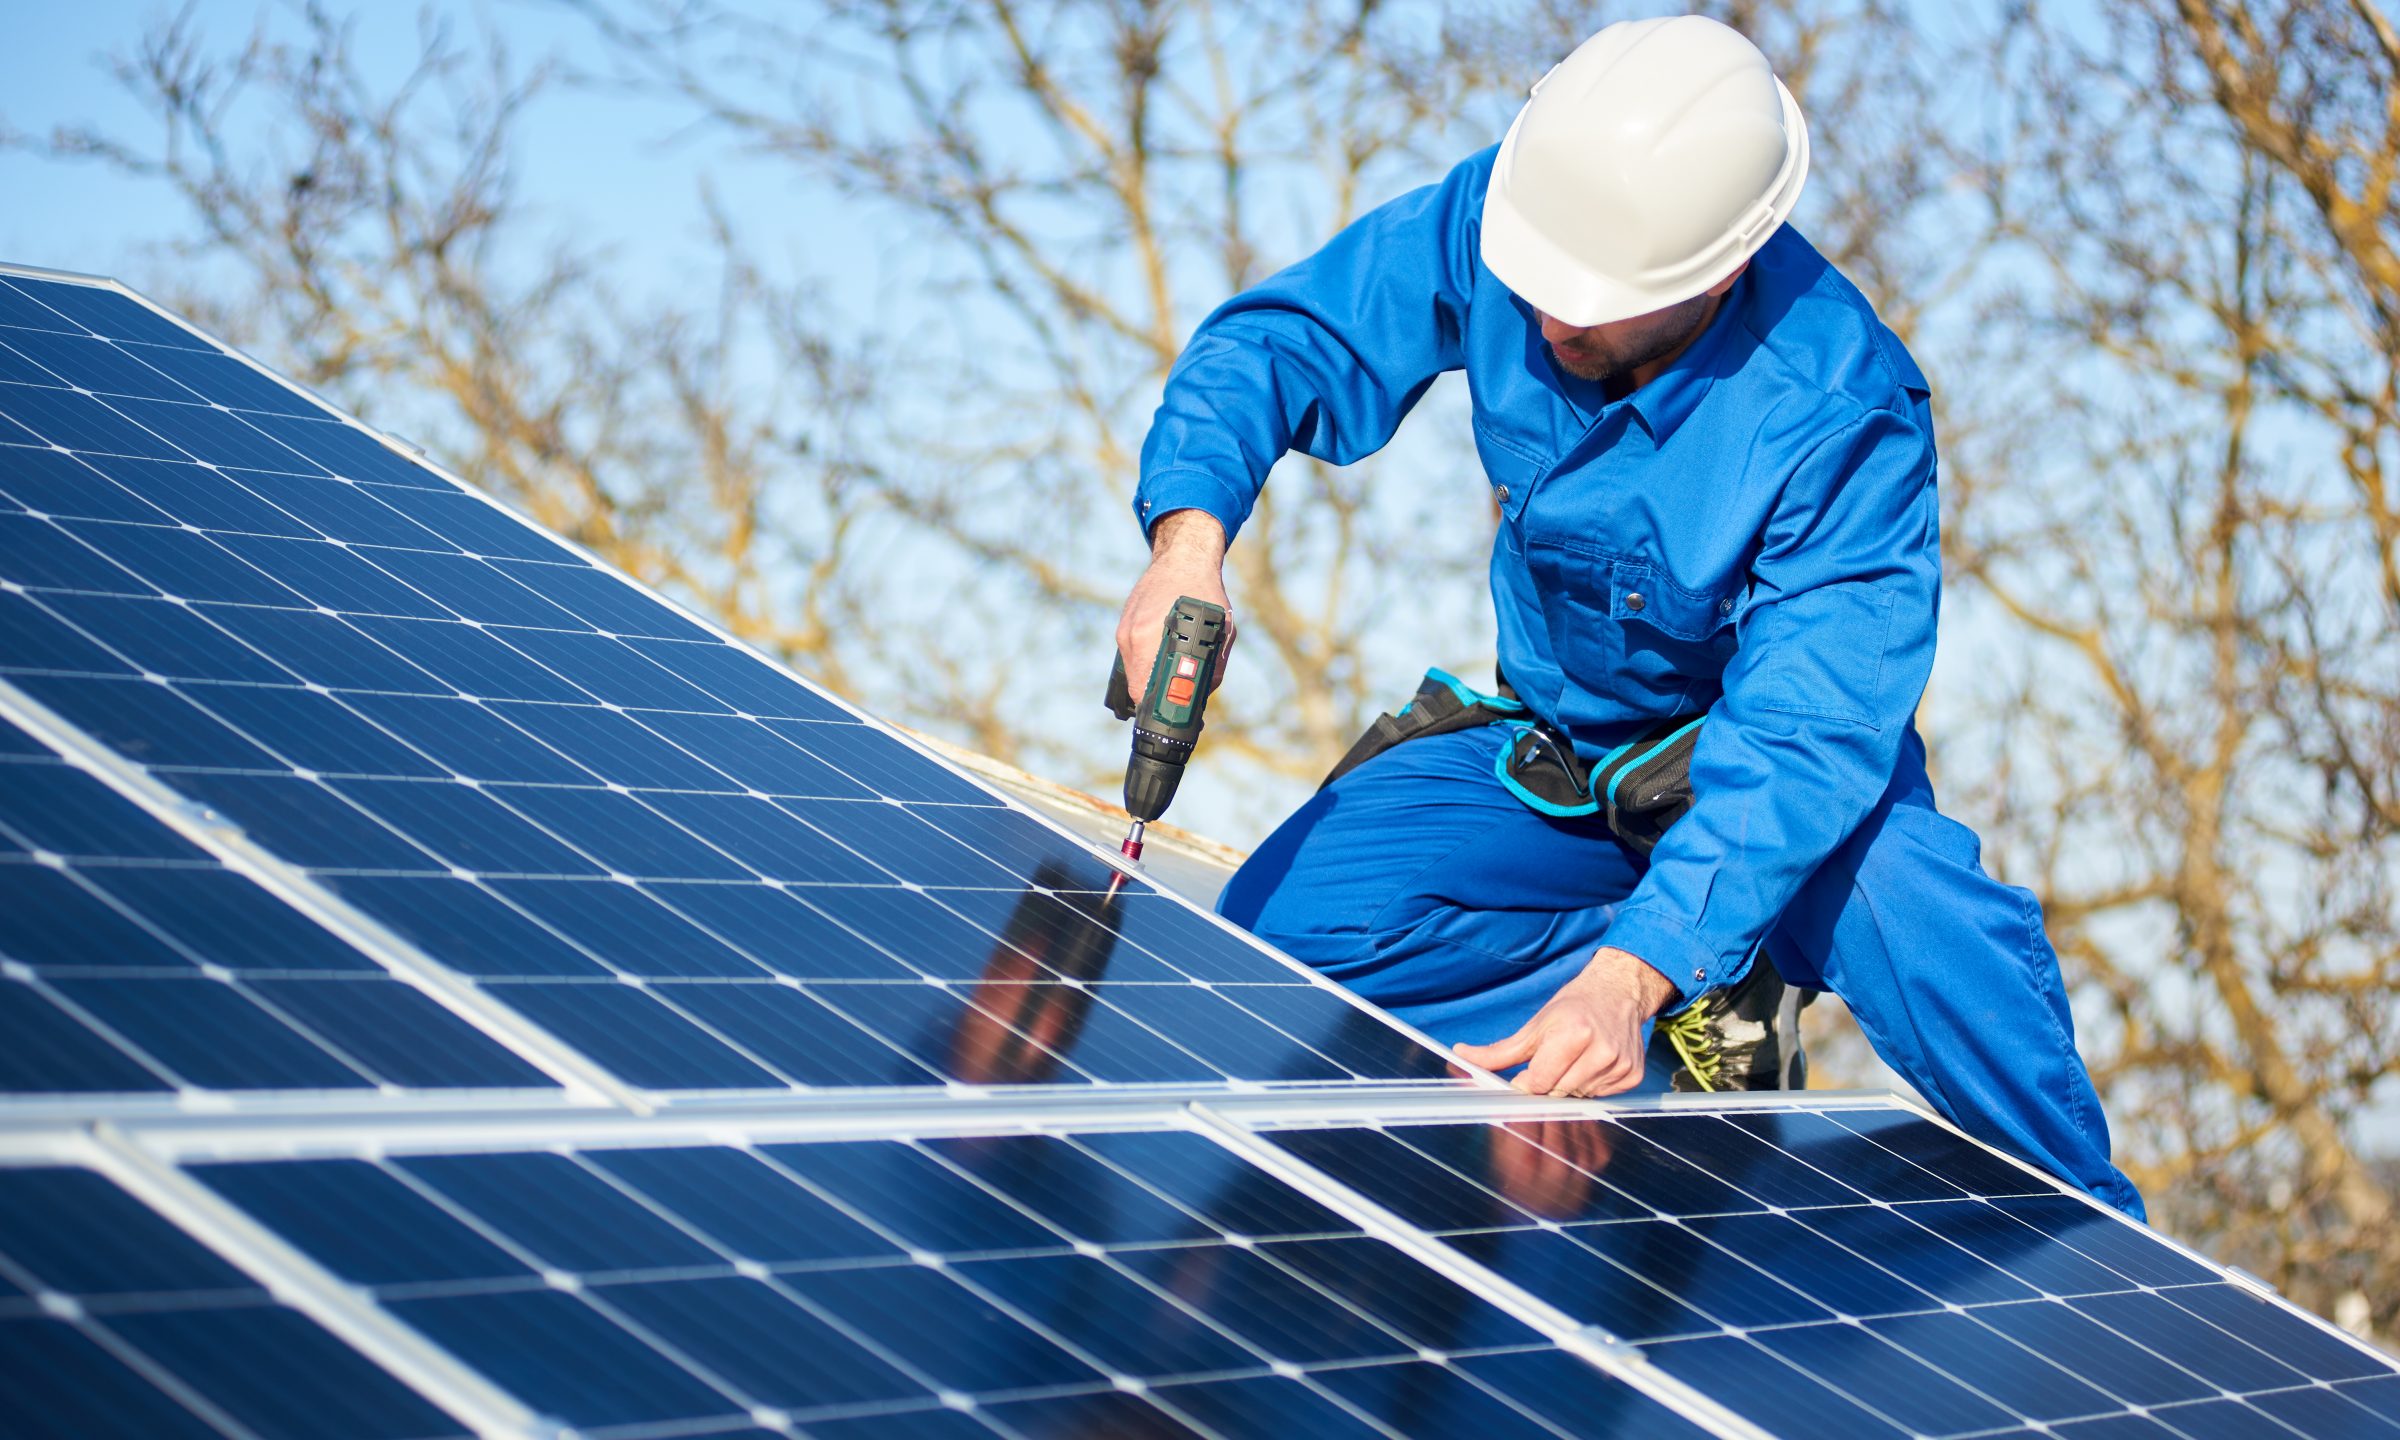 Solar Panel Installation: How to Install Rooftop Solar Panel - World Energy  Forum